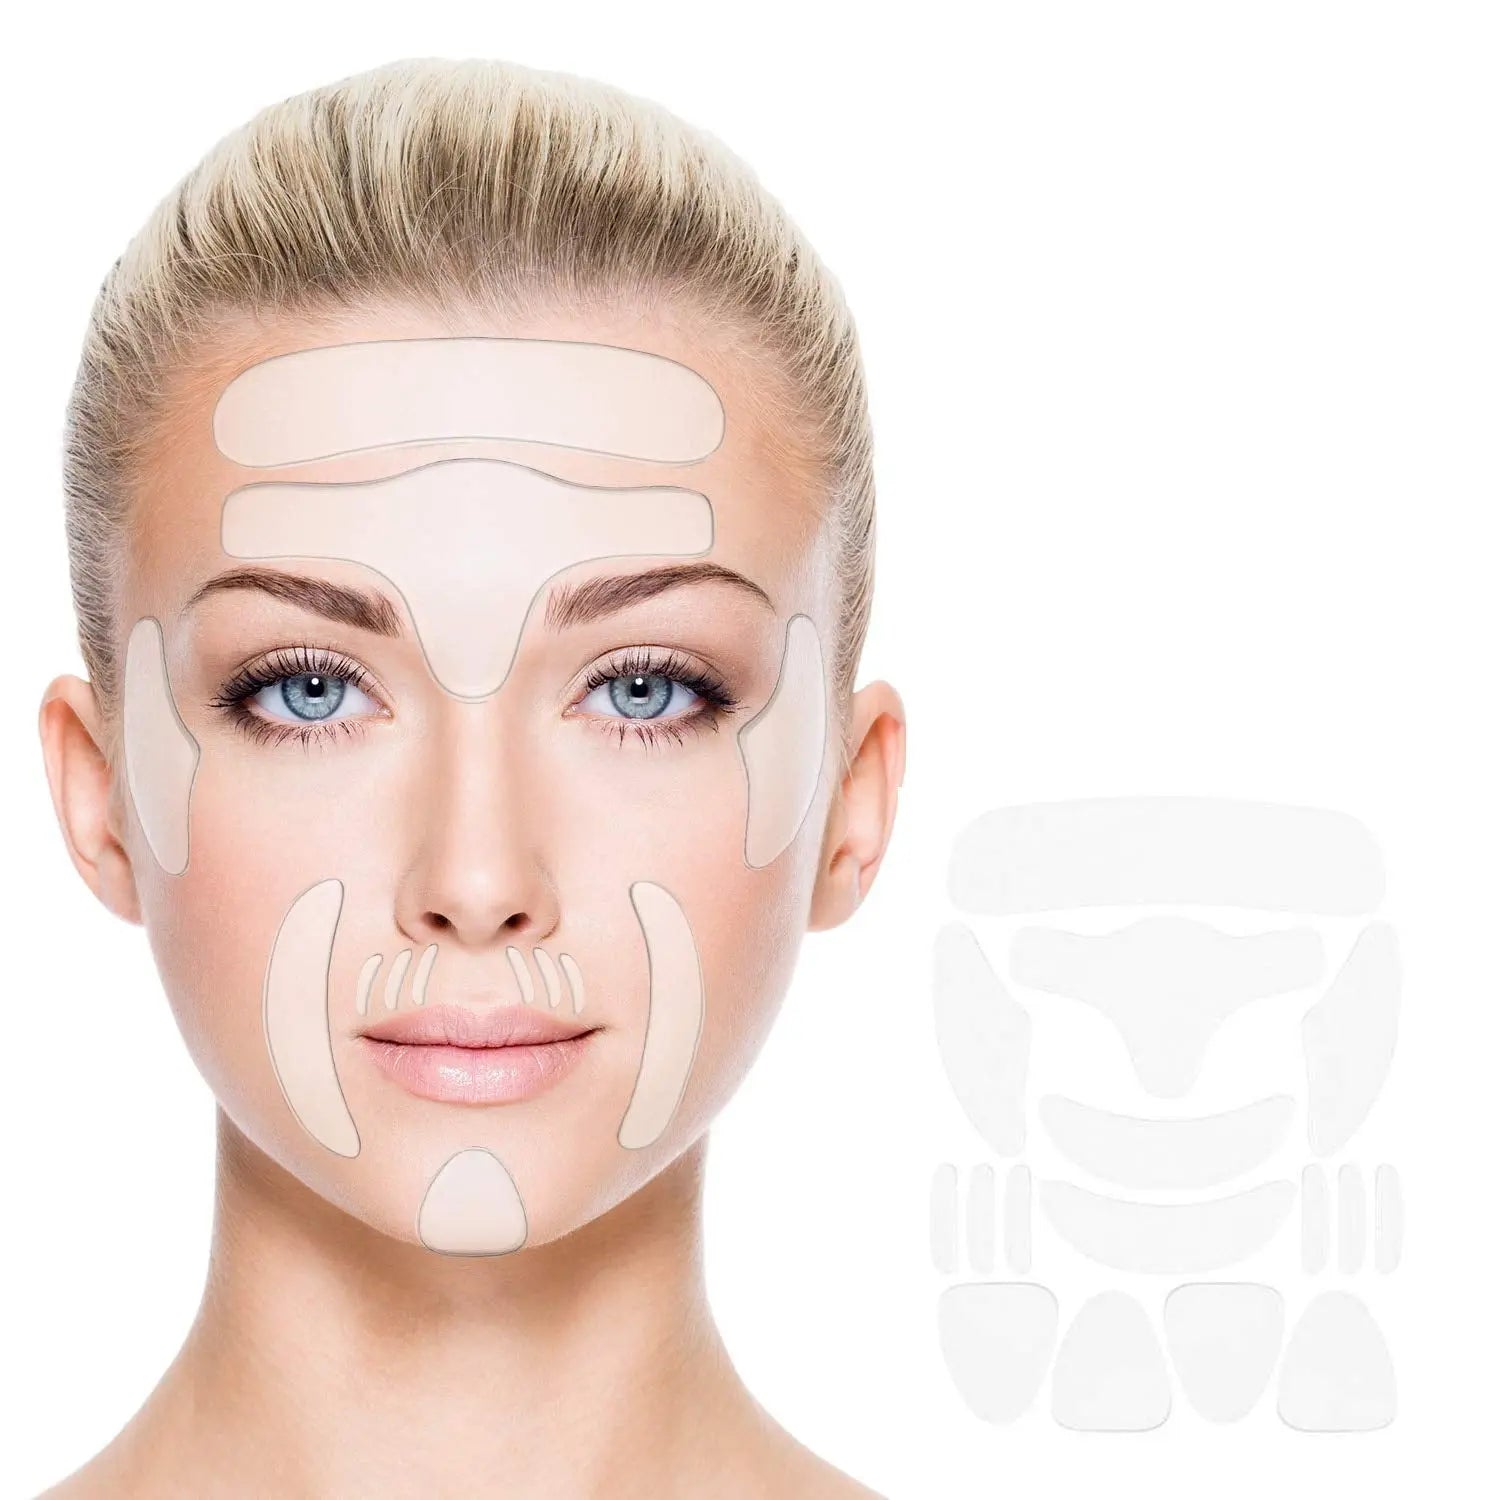 Face Wrinkle Patches-Train Facial Muscles to Reduce Fine Lines,wrinkle